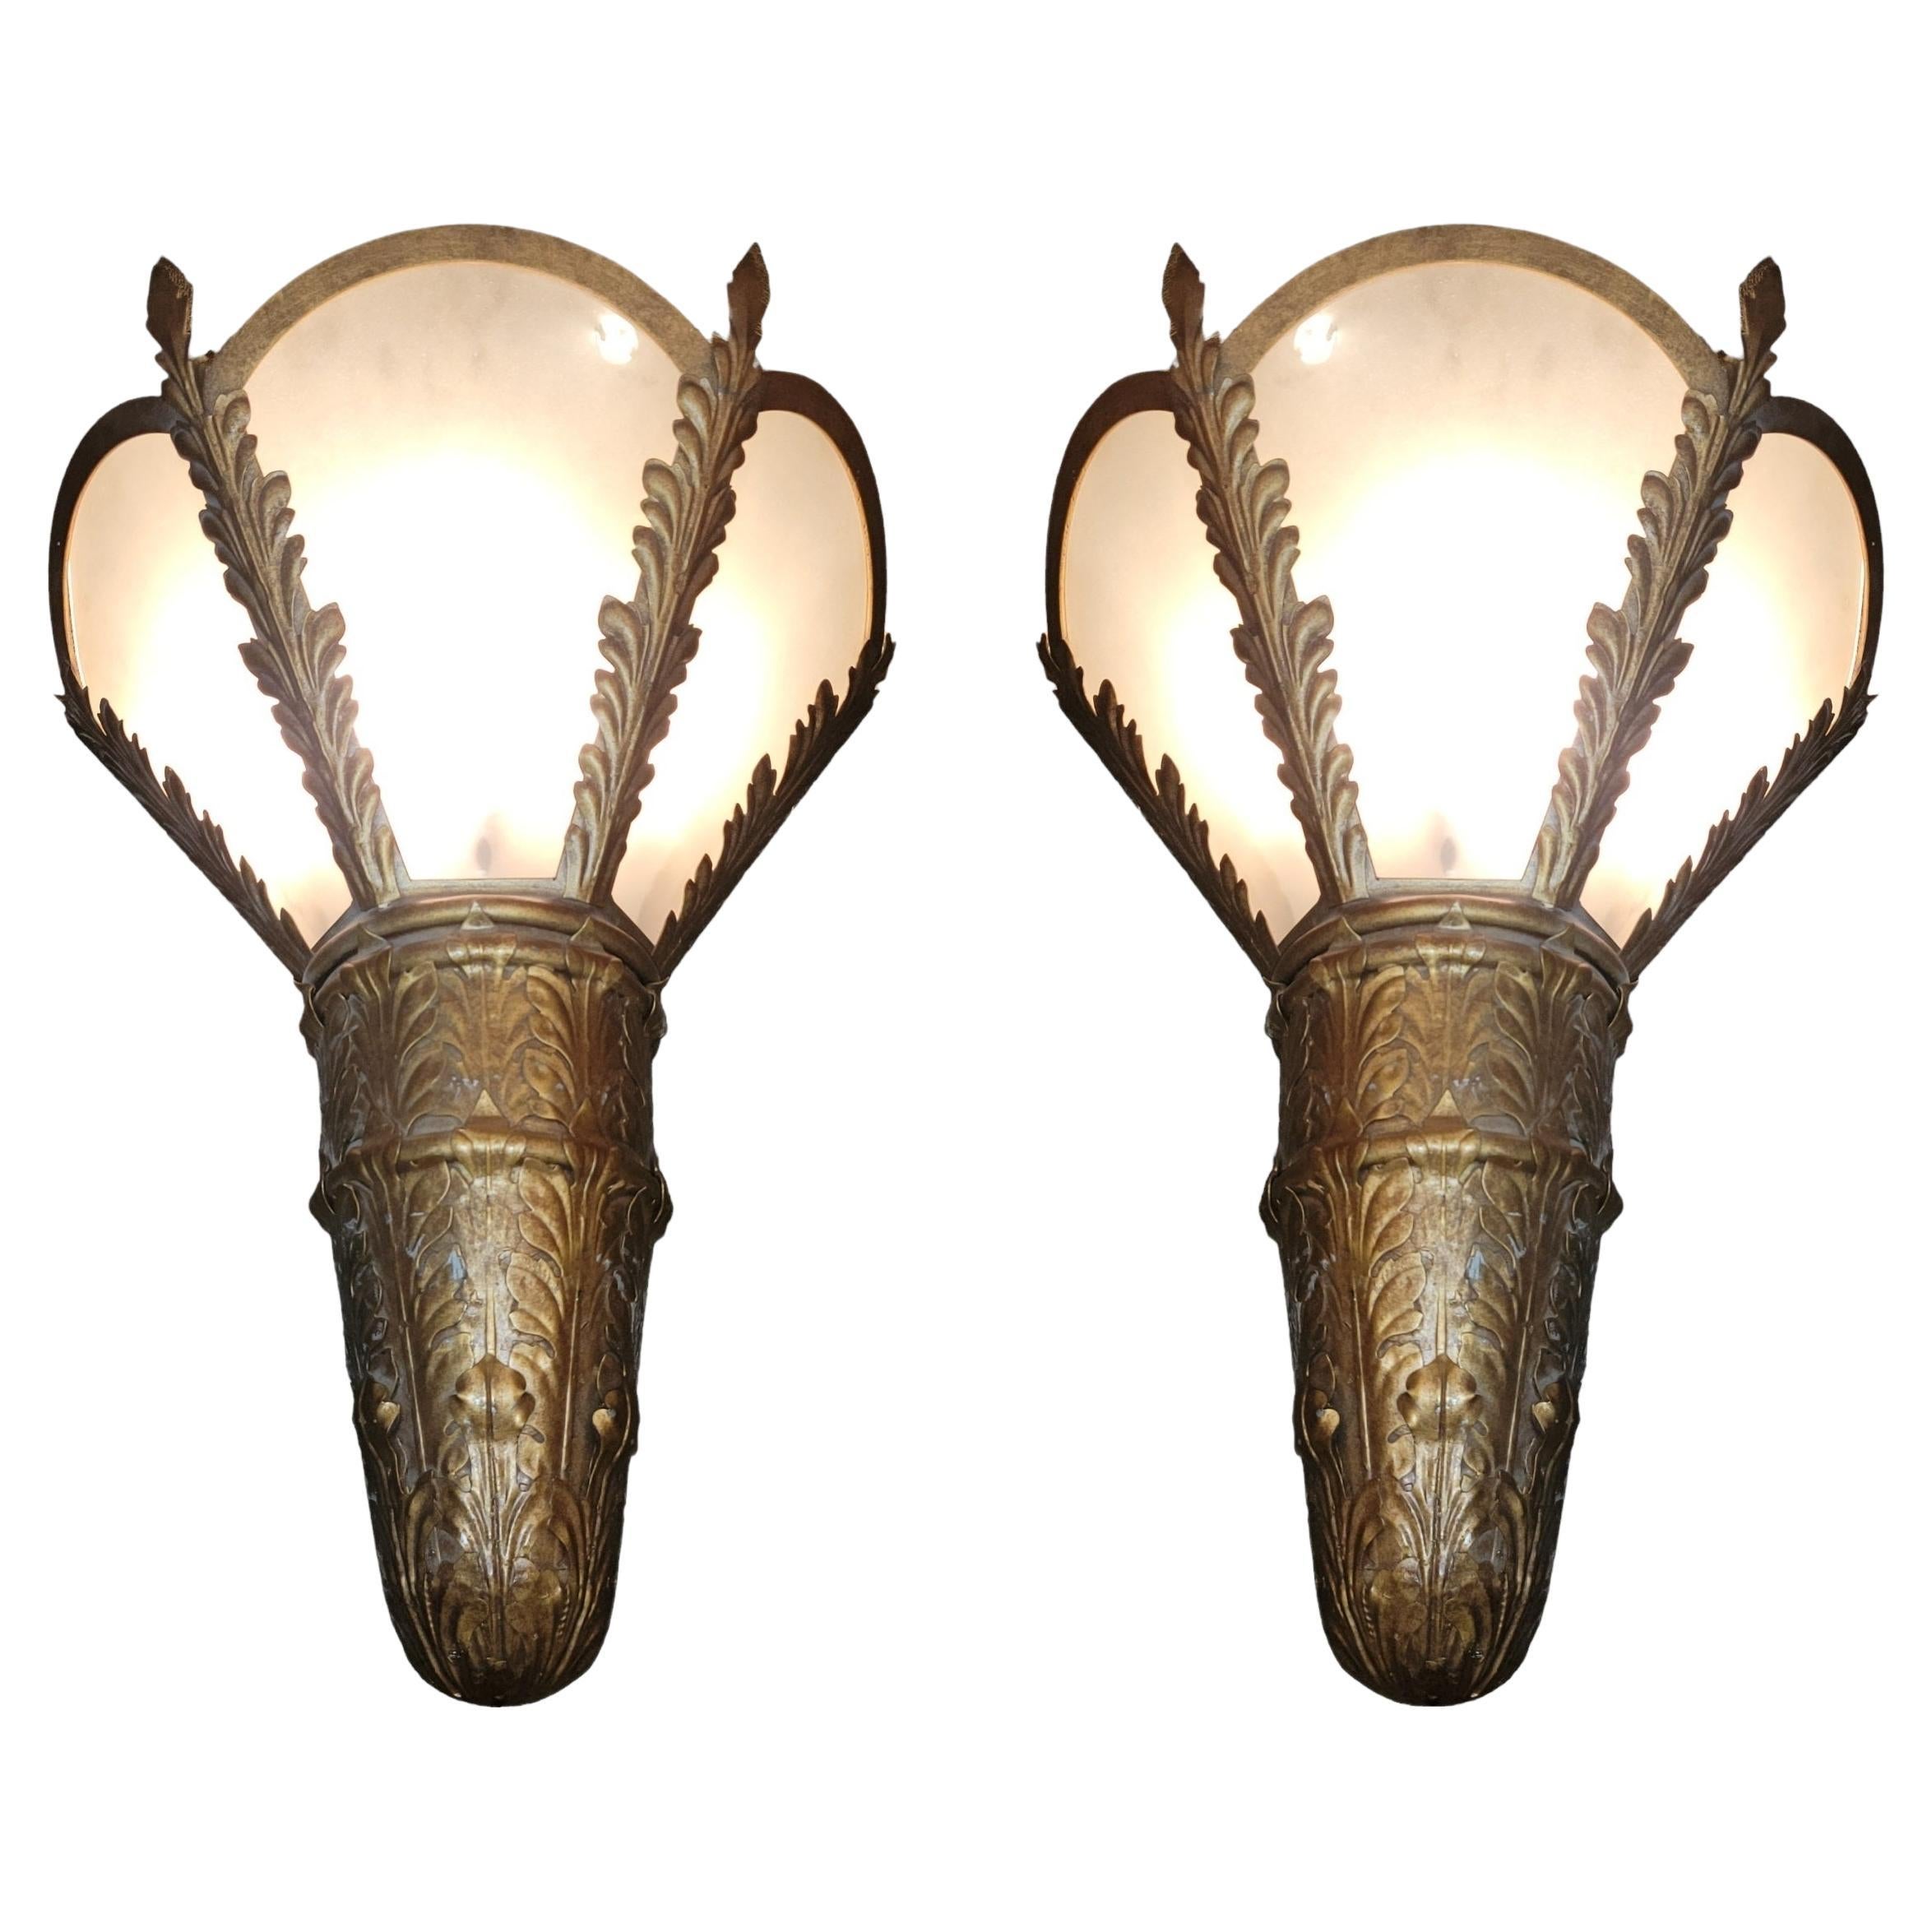 Pair of Metal Sconces From The Century Plaza Hotel